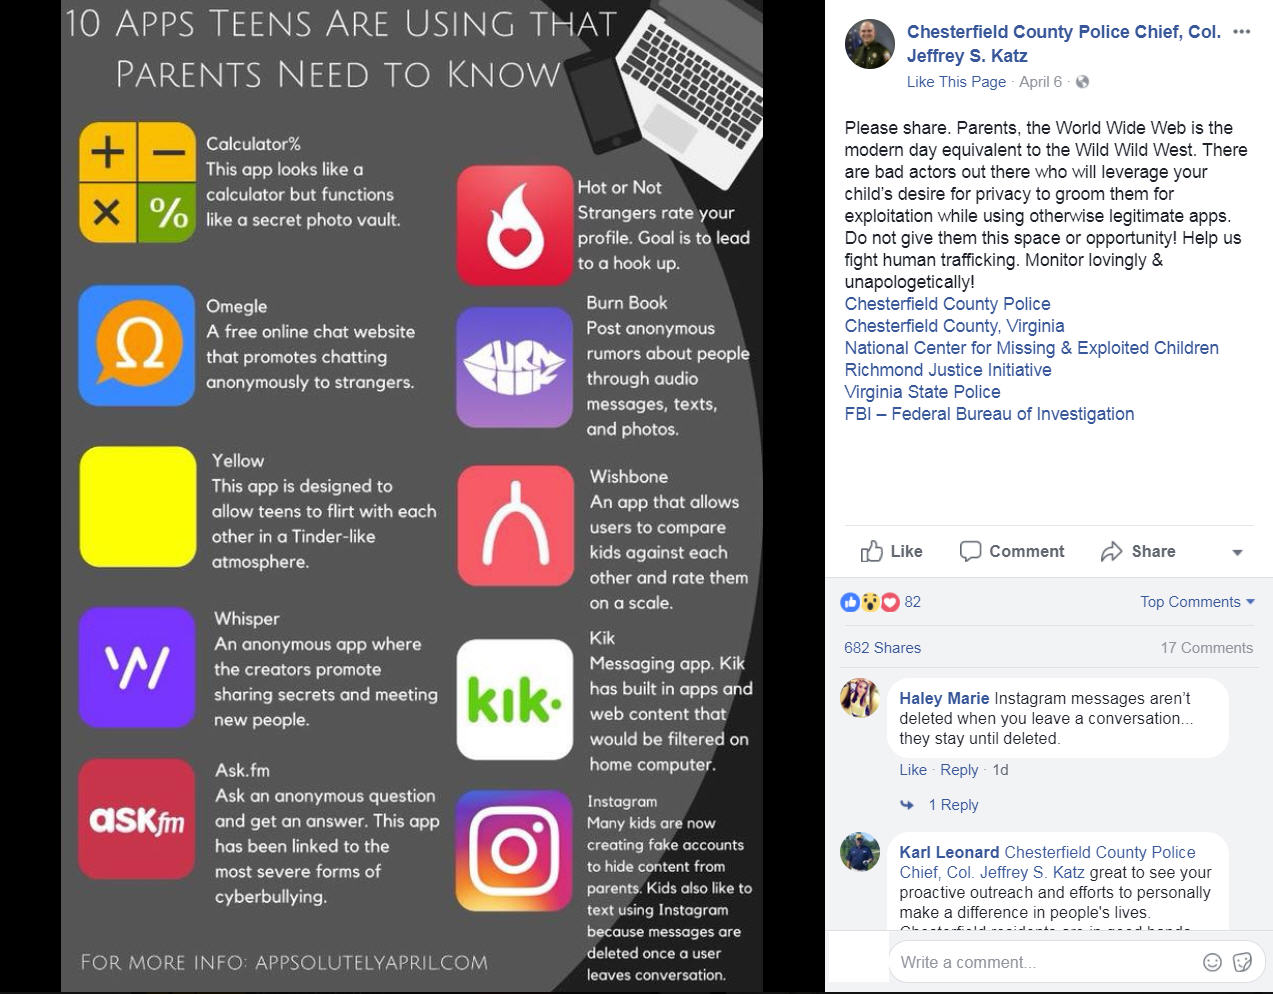 10 Apps Kids Use That Parents Should Know About